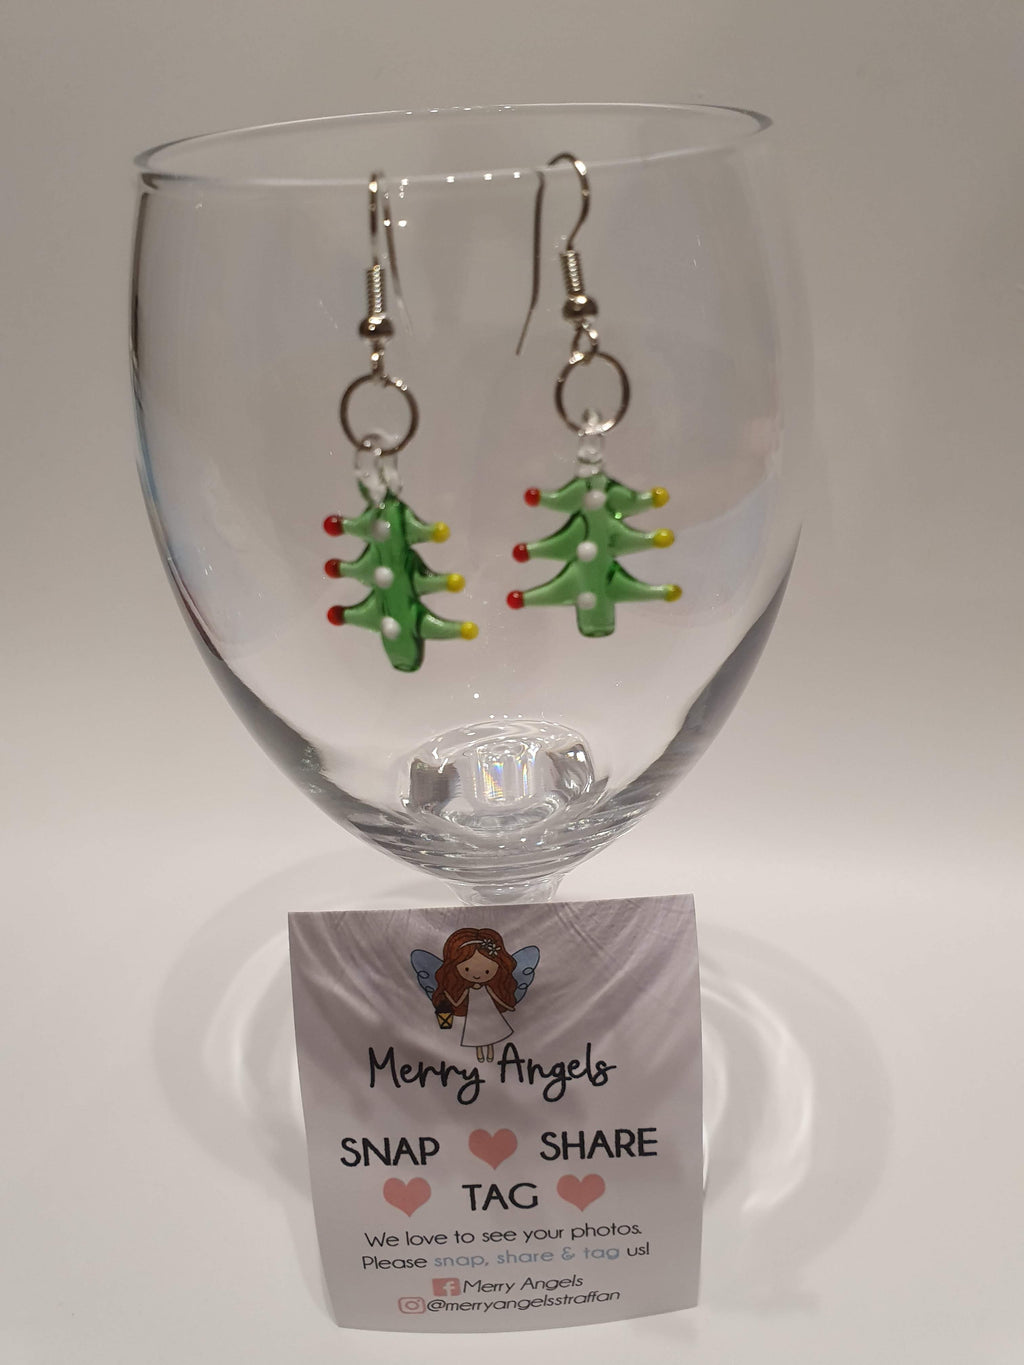 This is a picture of a pair of Christmas tree earrings hanging over a wine glass